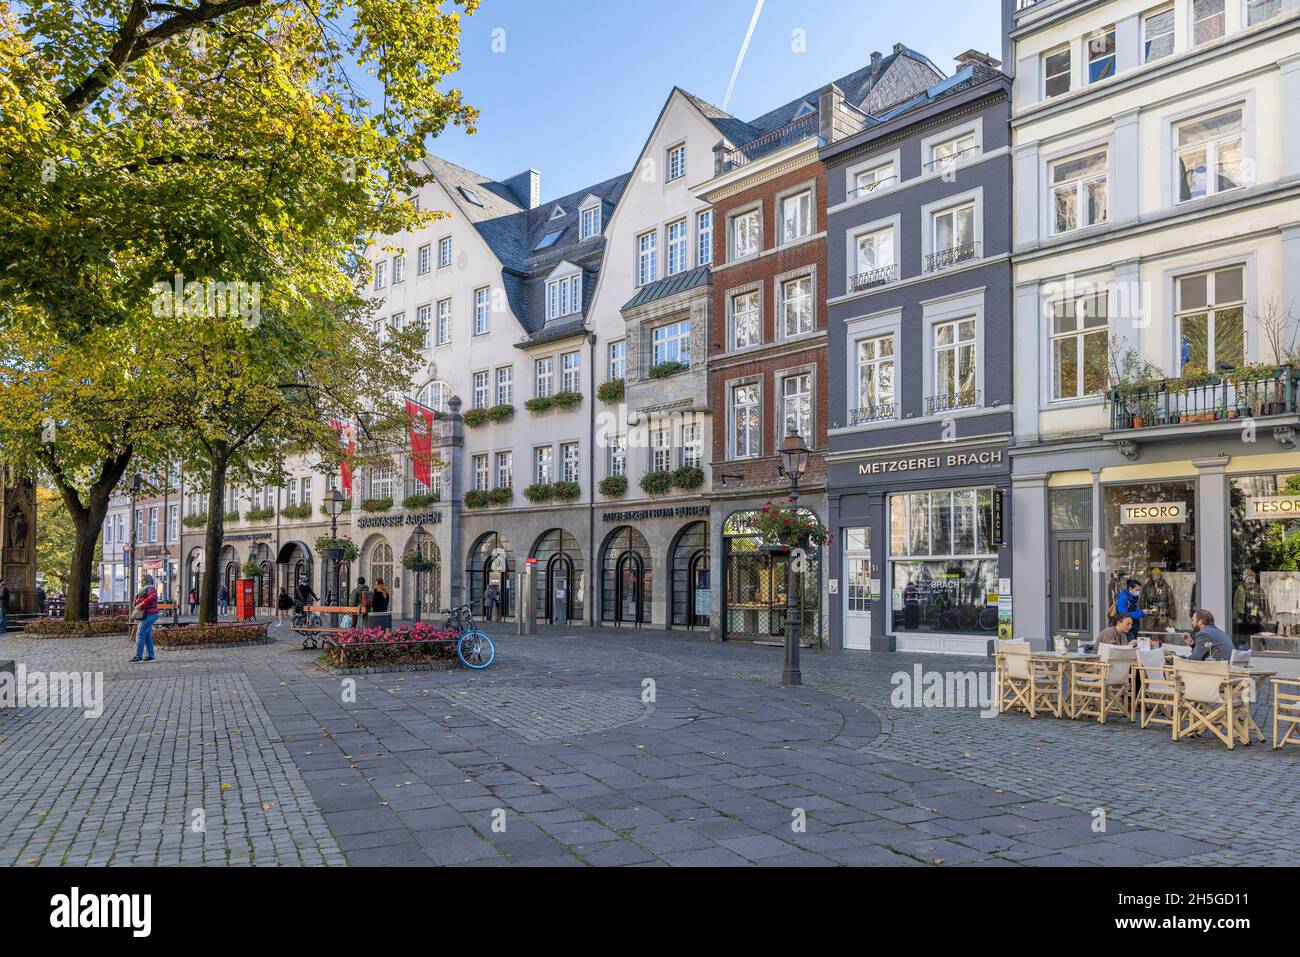 Narrow streets in Aachen old town with incidental people walking by Stock Photo